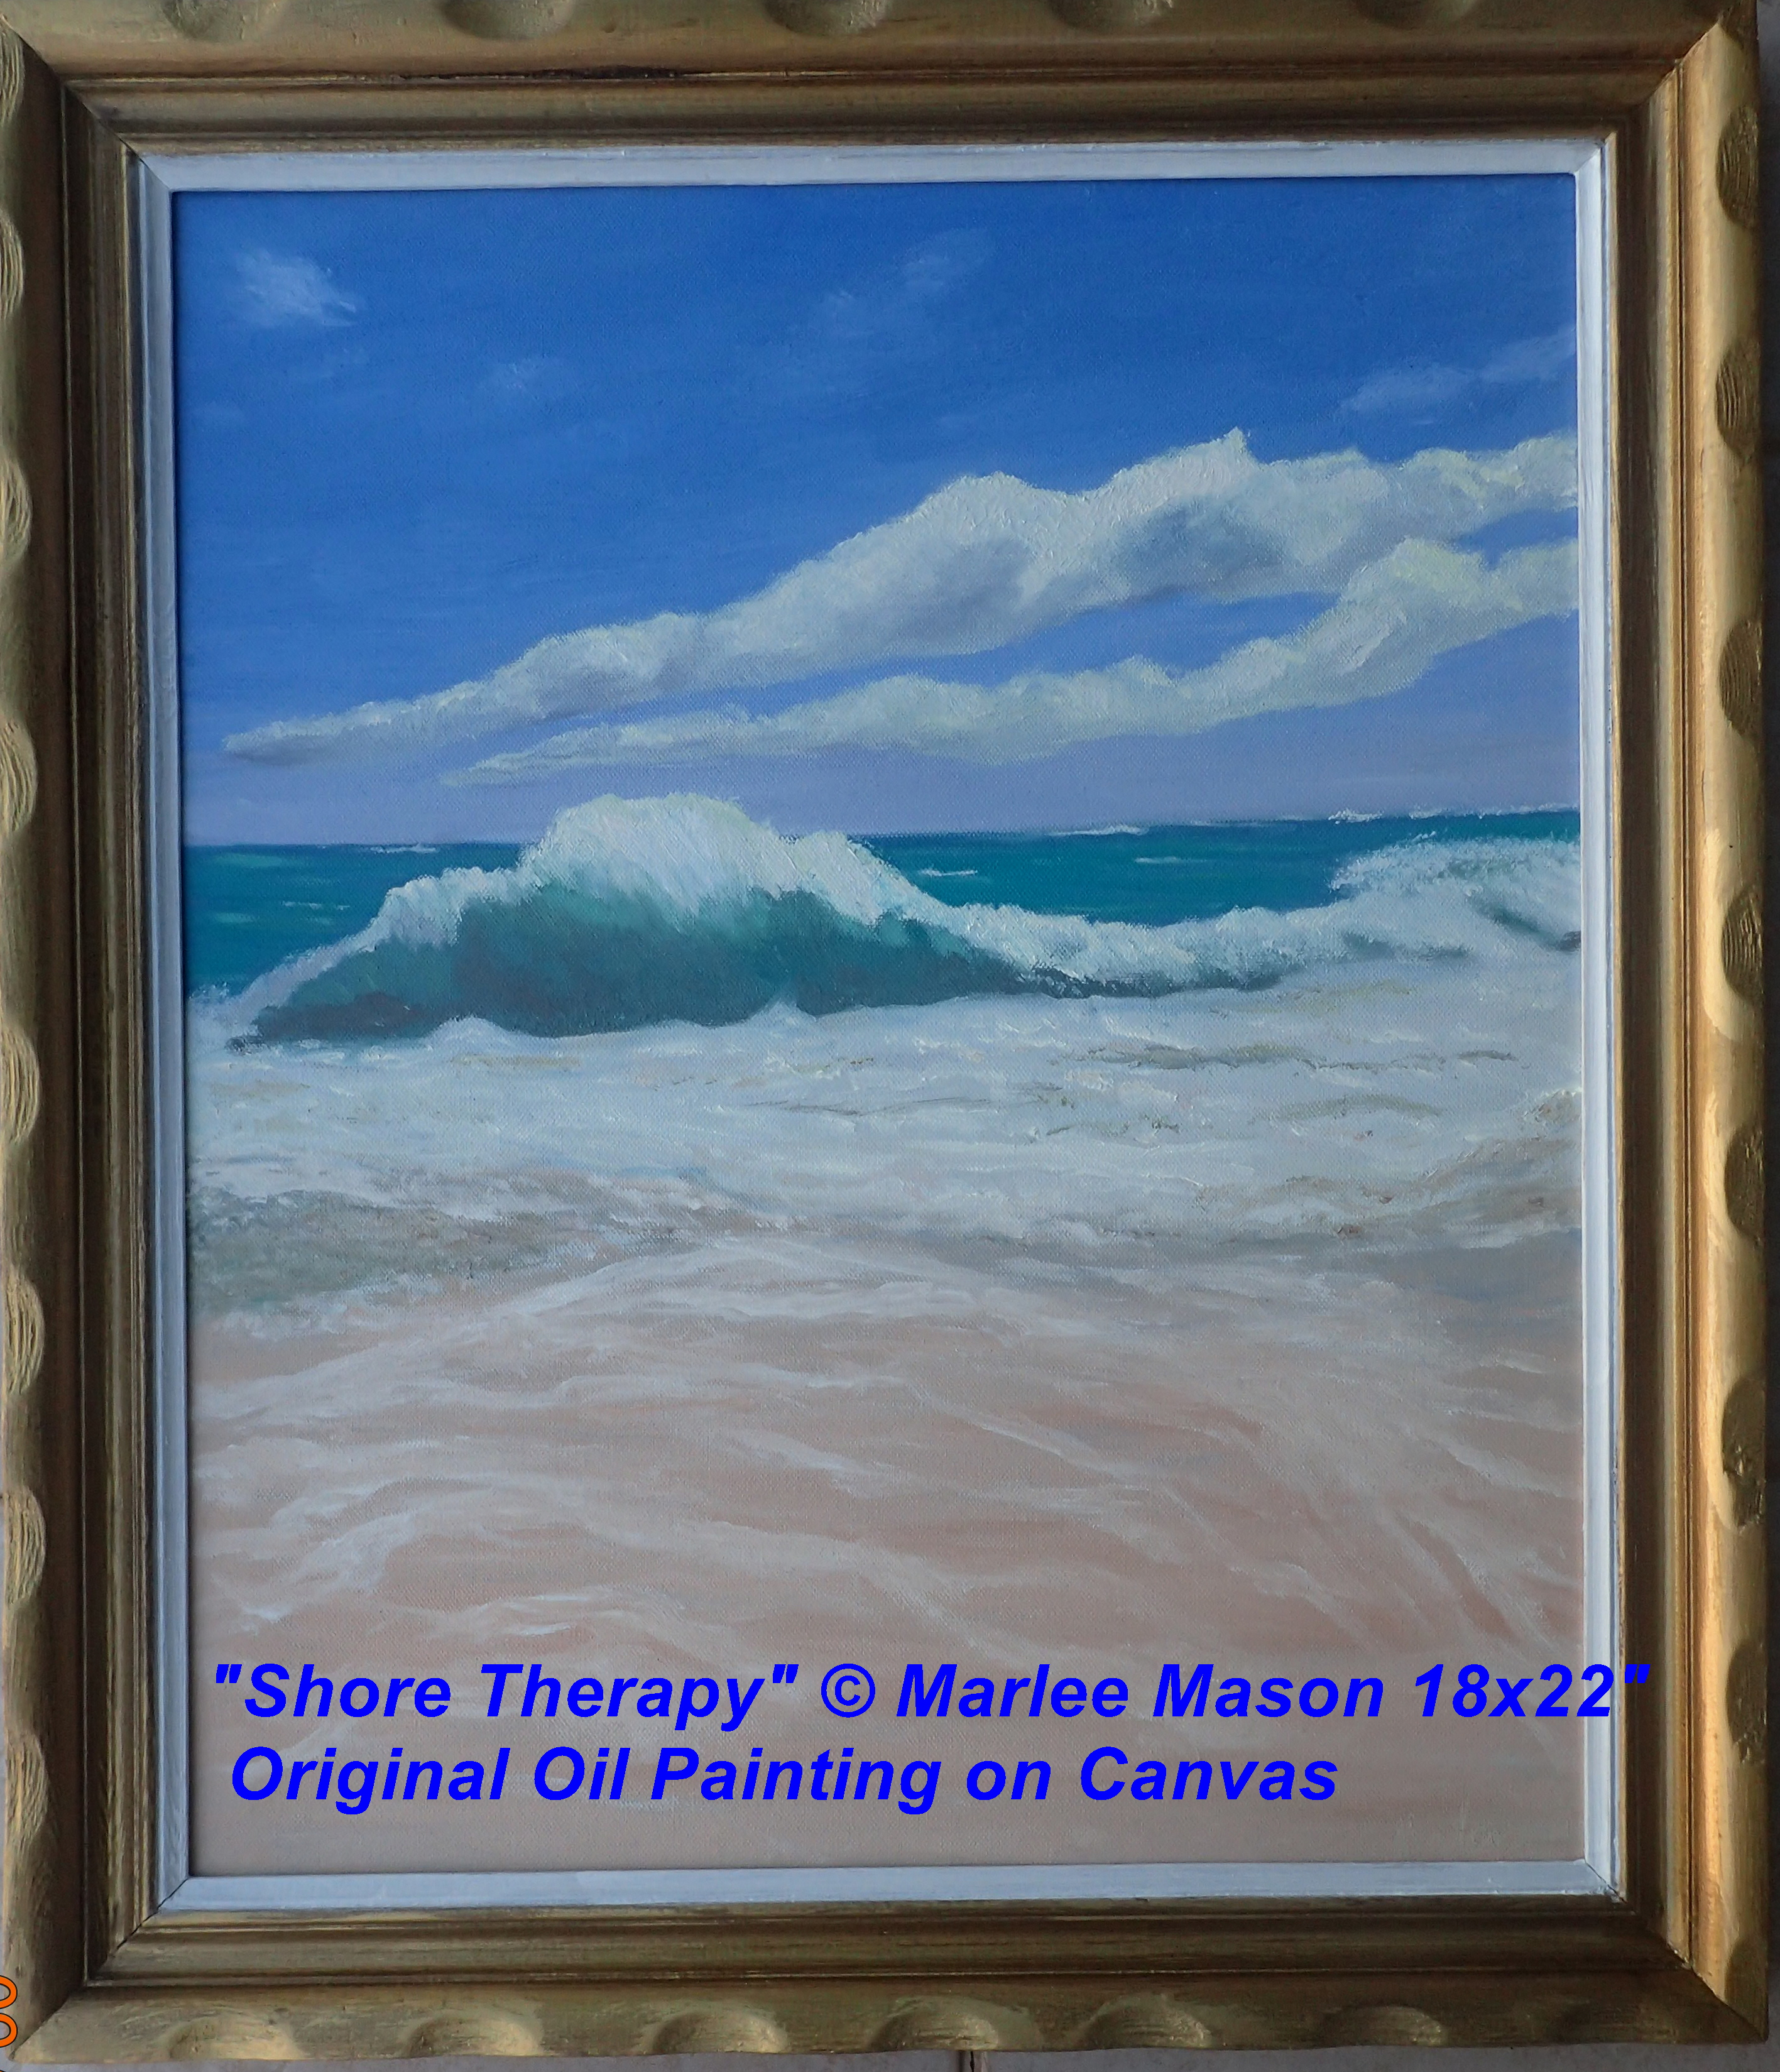 Original Oil on Canvas 18"x22 © Marlee Mason        2020 has been a year of non stop effort in recovery from 2019 Hurricane Dorian.  As a mental health break we need some time at the shore,  just to 